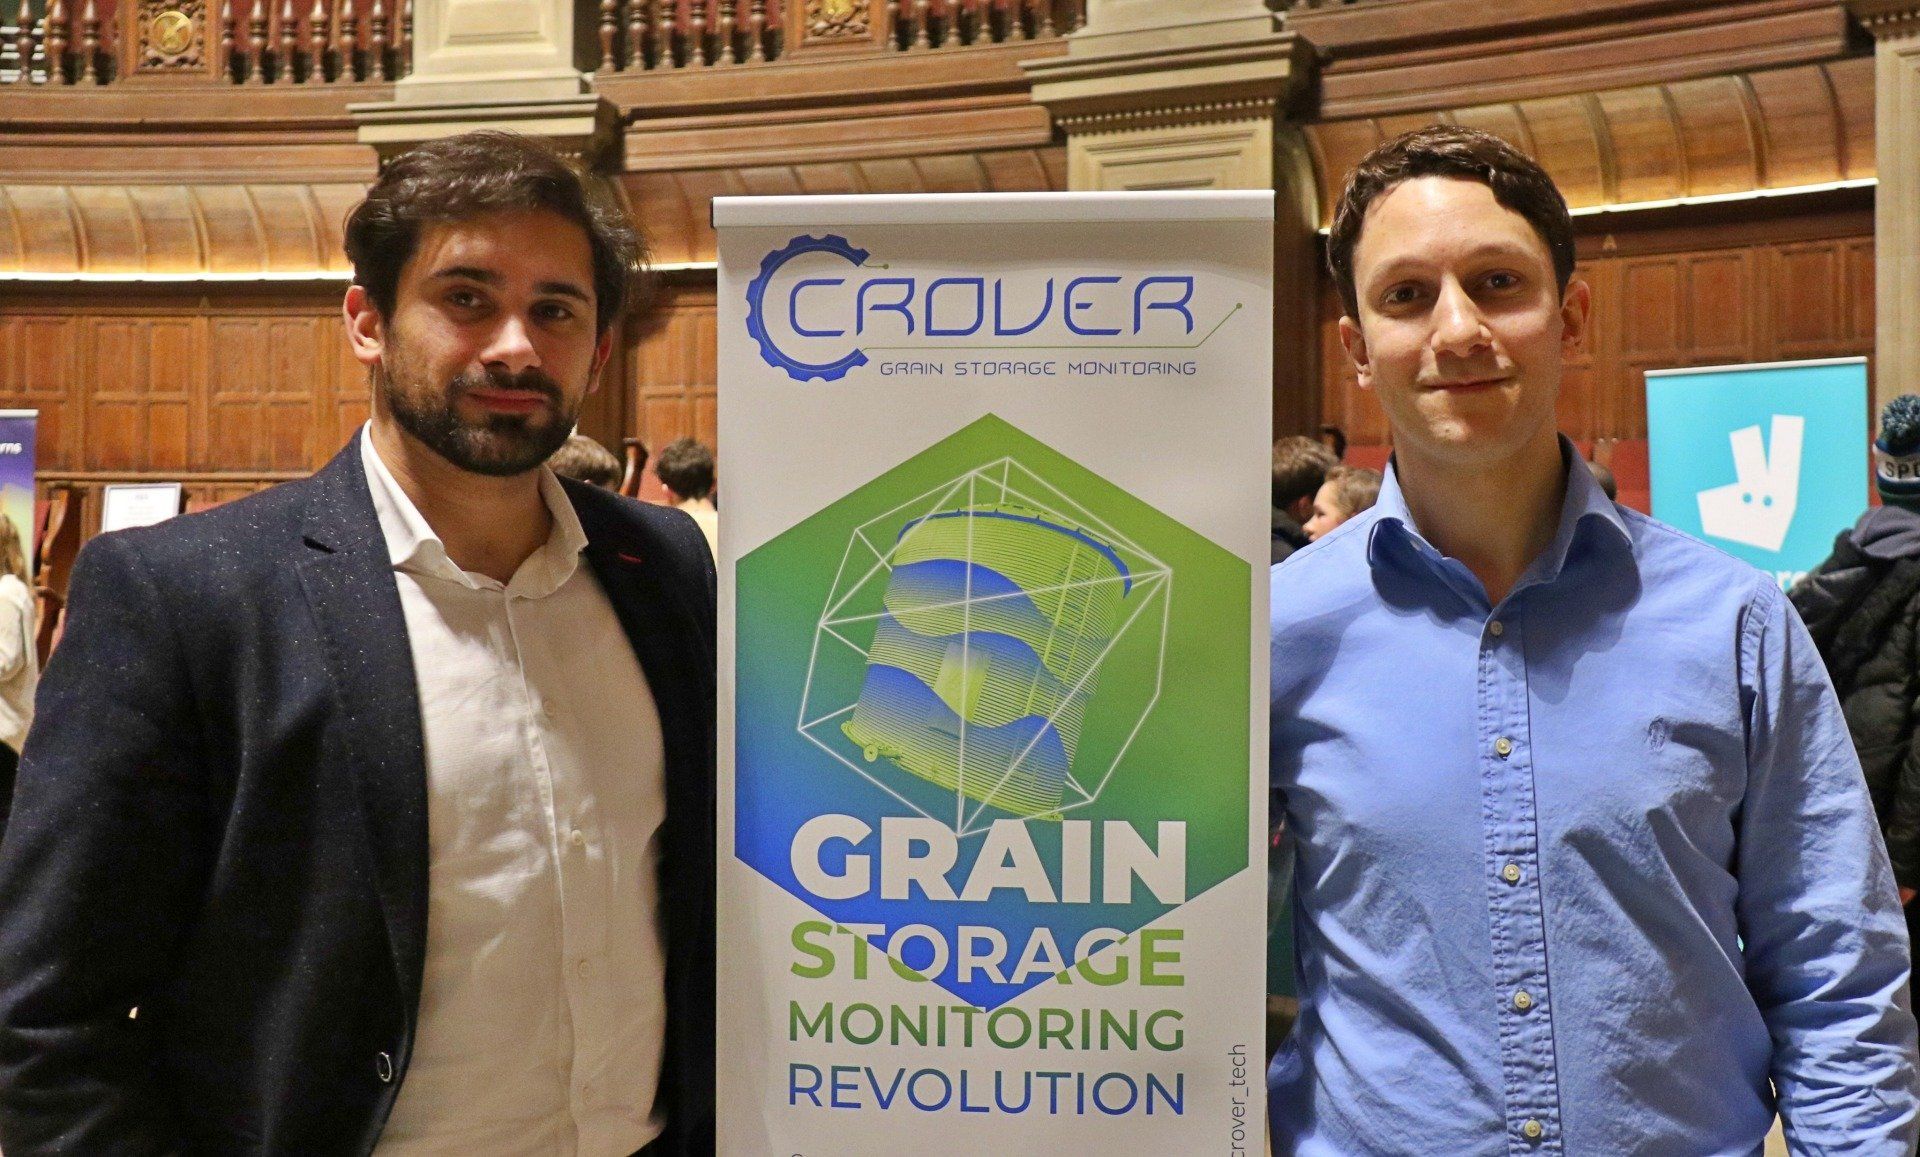 Crover Founder Lorenzo Conti (right) and Crover Operations and Industry Liaison Executive Gianlorenzo De Santis (left) at the 2020 Careers in Tech and Data Fair in McEwan Hall, Edinburgh